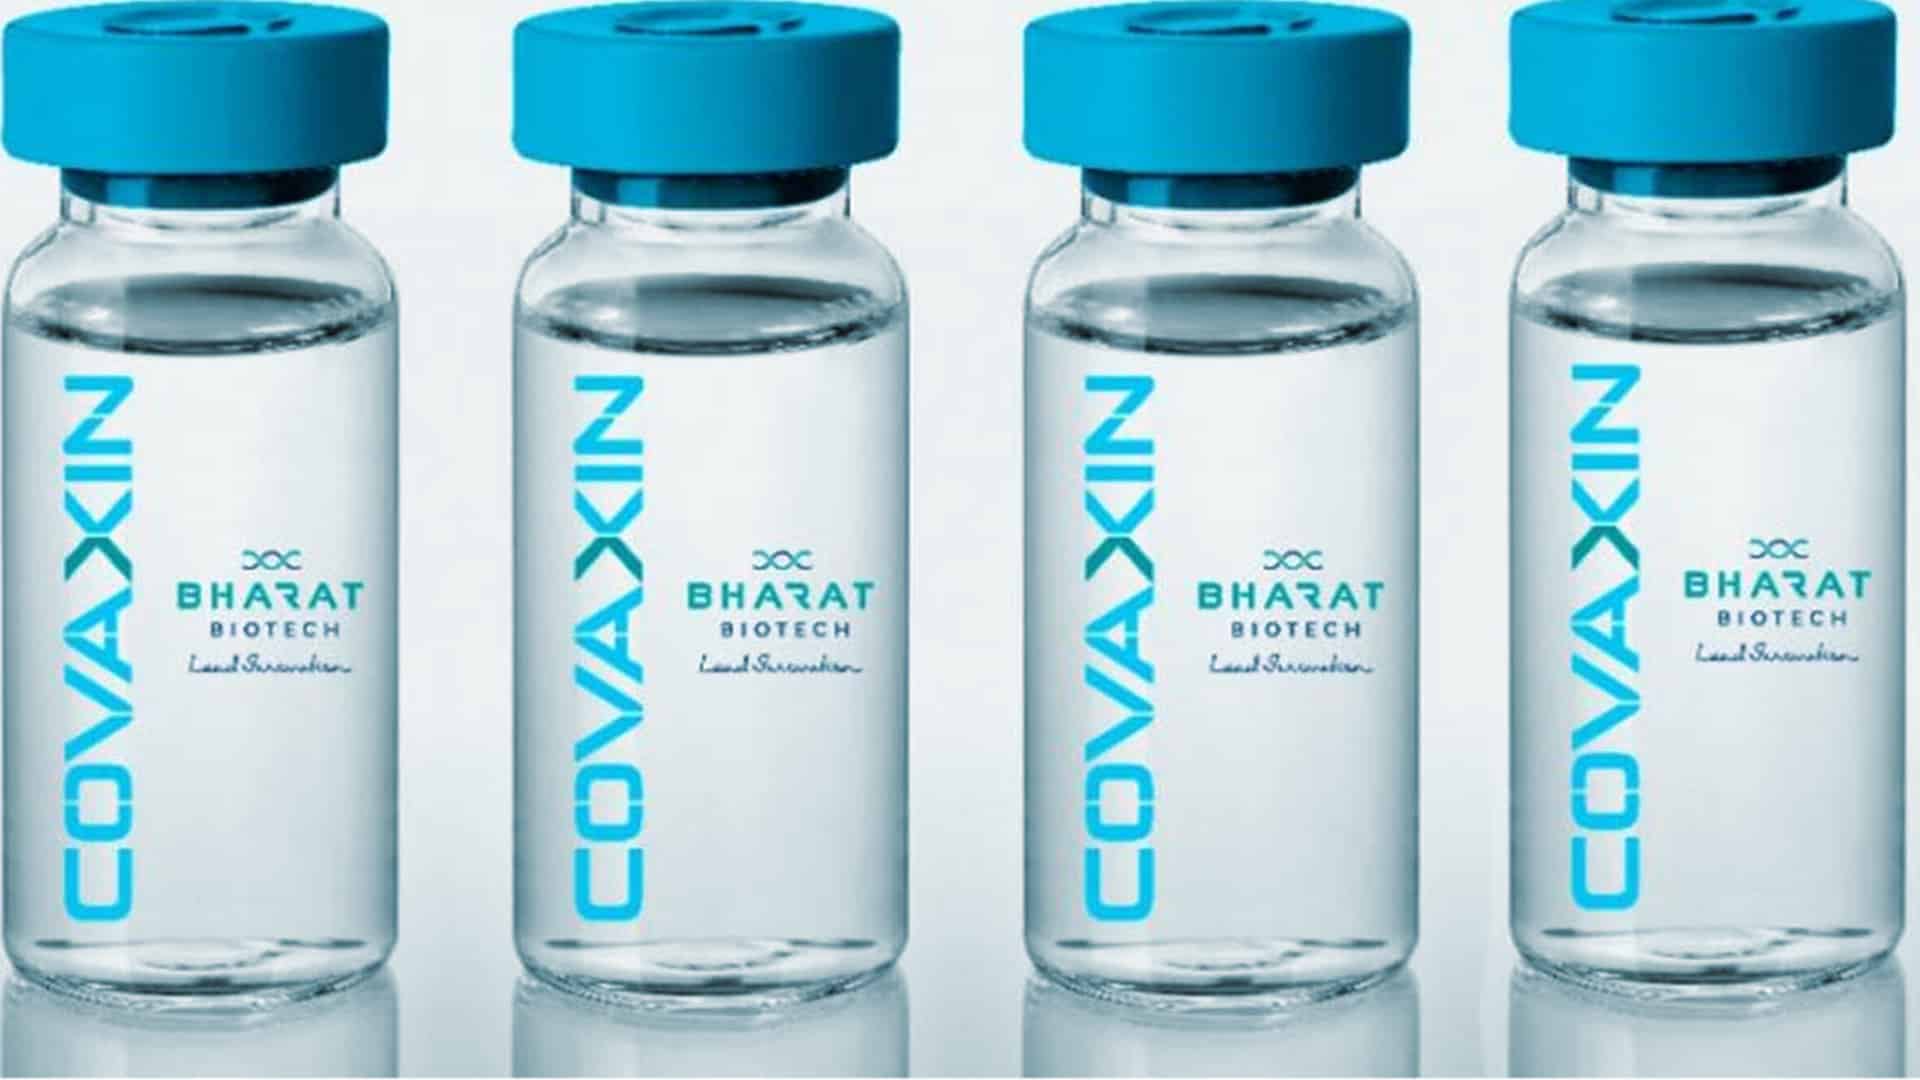 Bharat Biotech's Covaxin gets DCGI nod for phase 2,3 trial for 2-18 age group